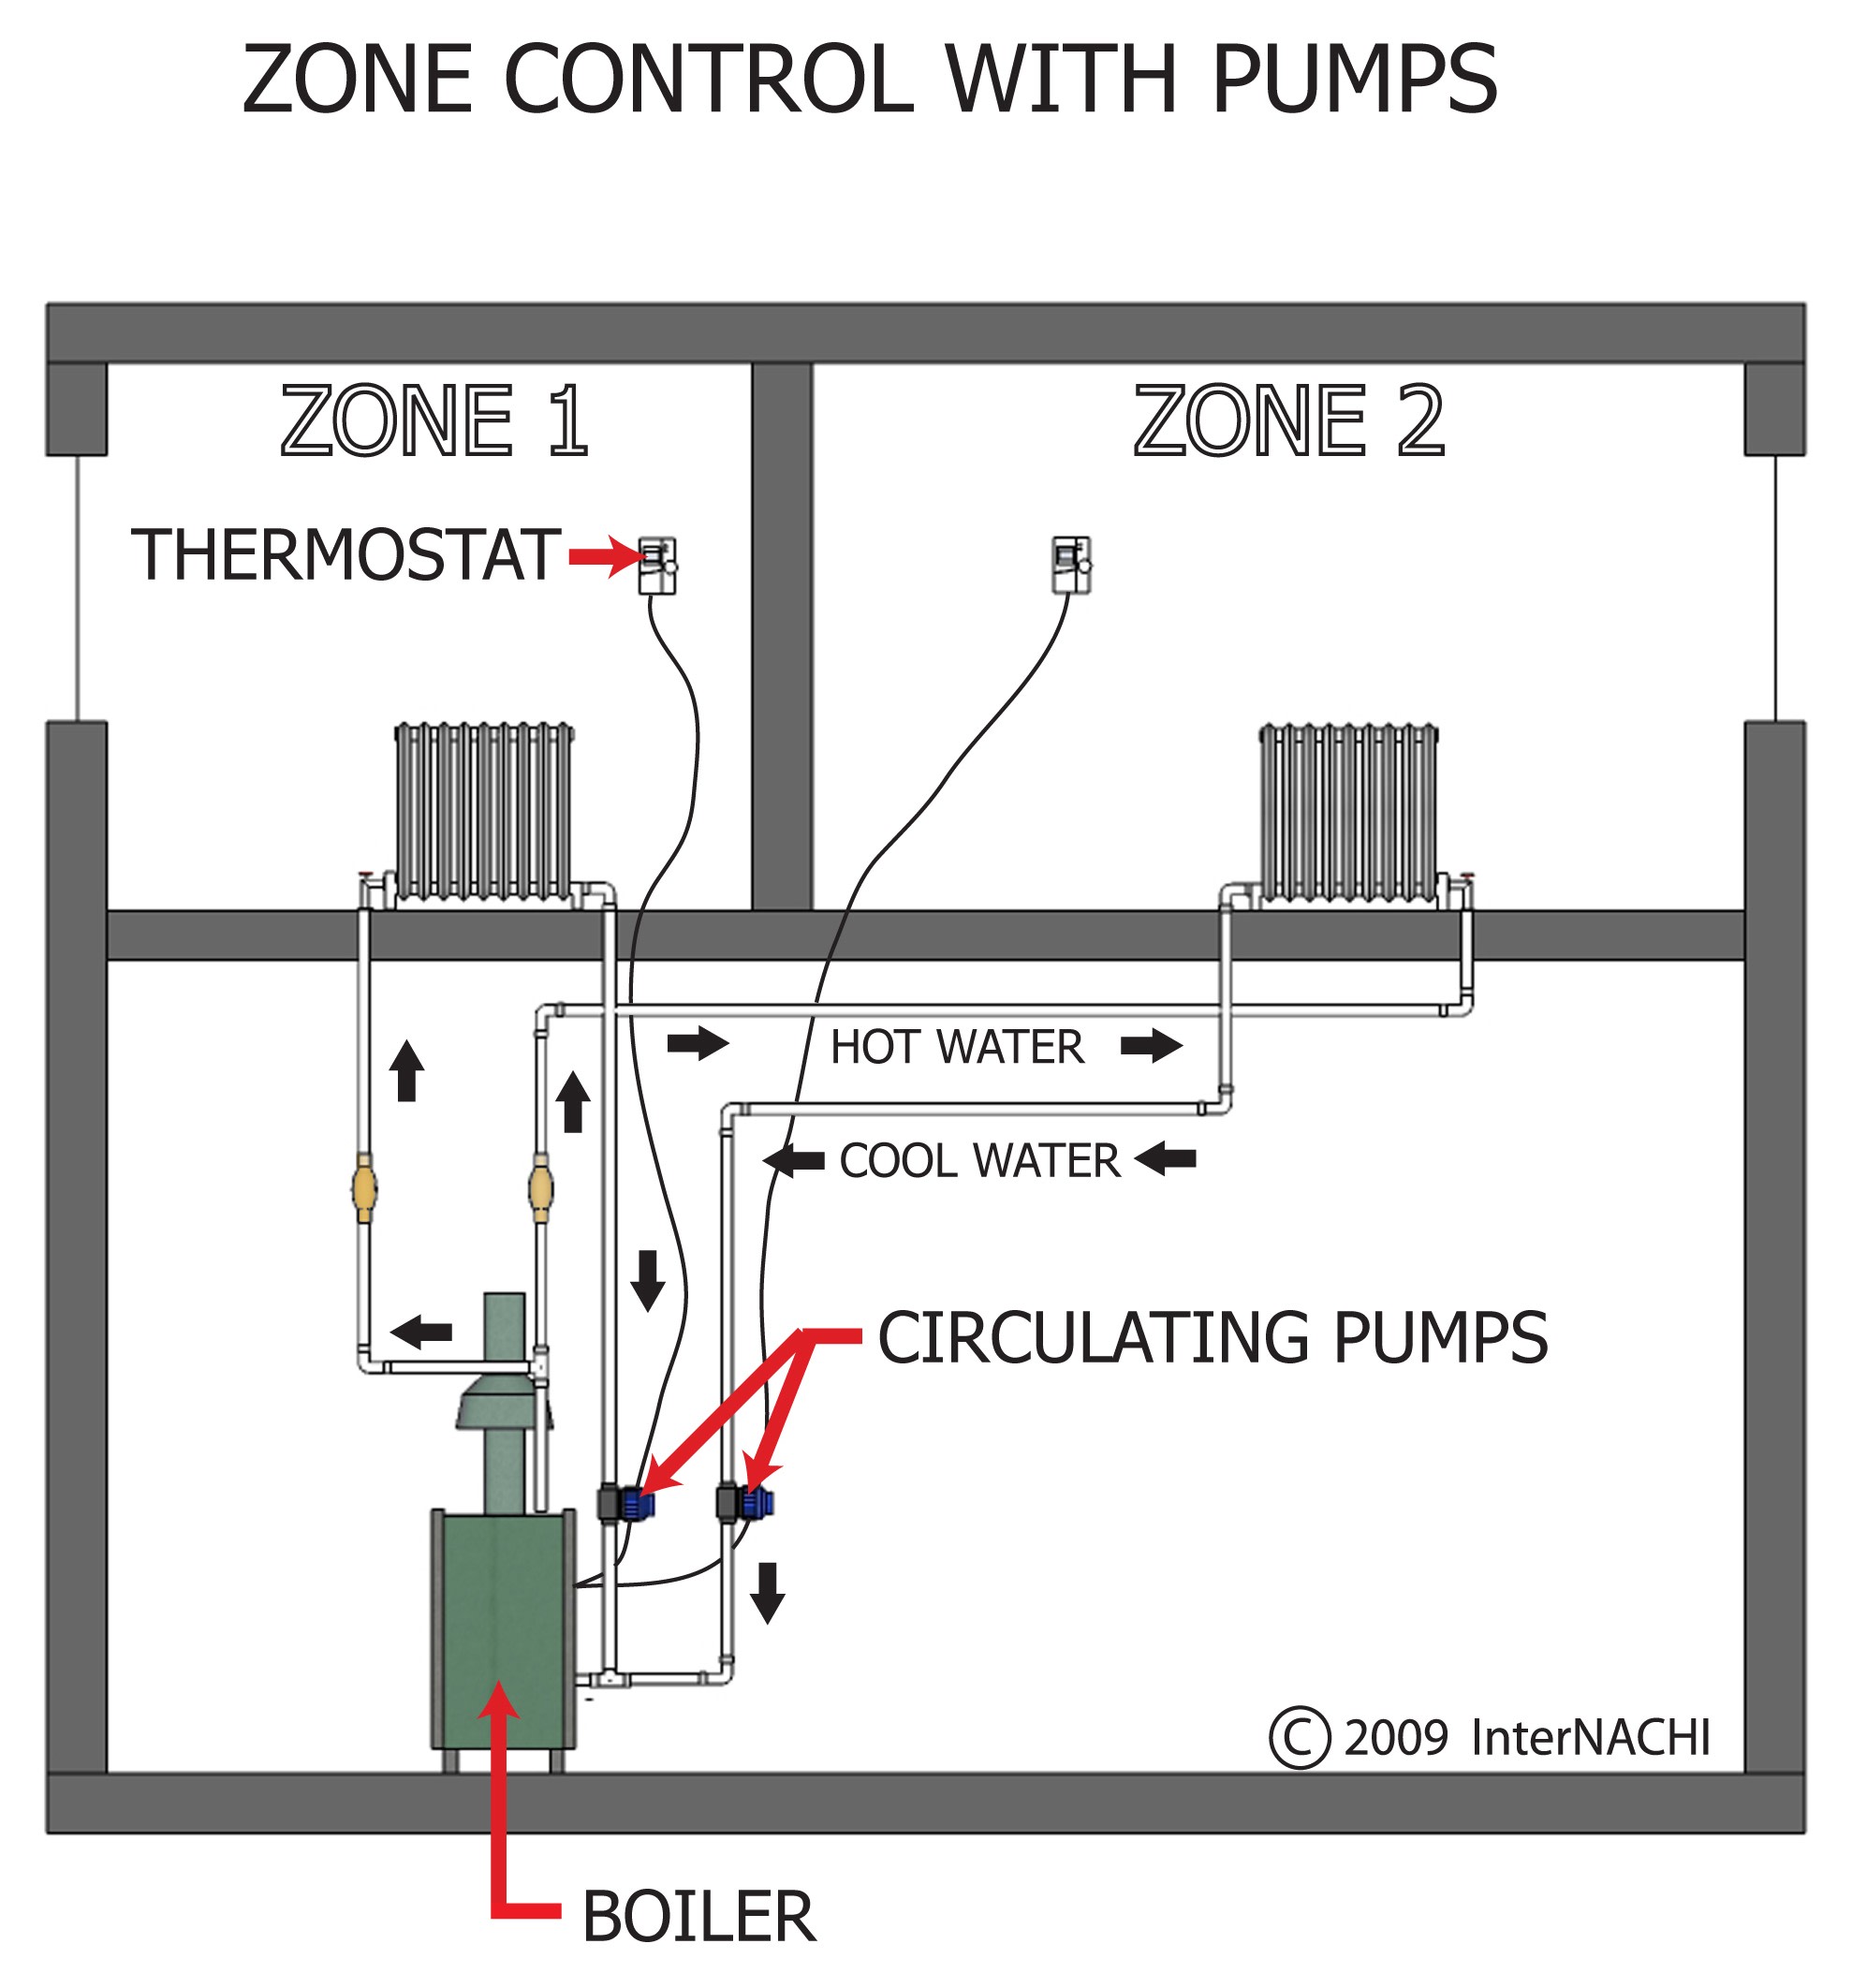 Zone control with pumps.